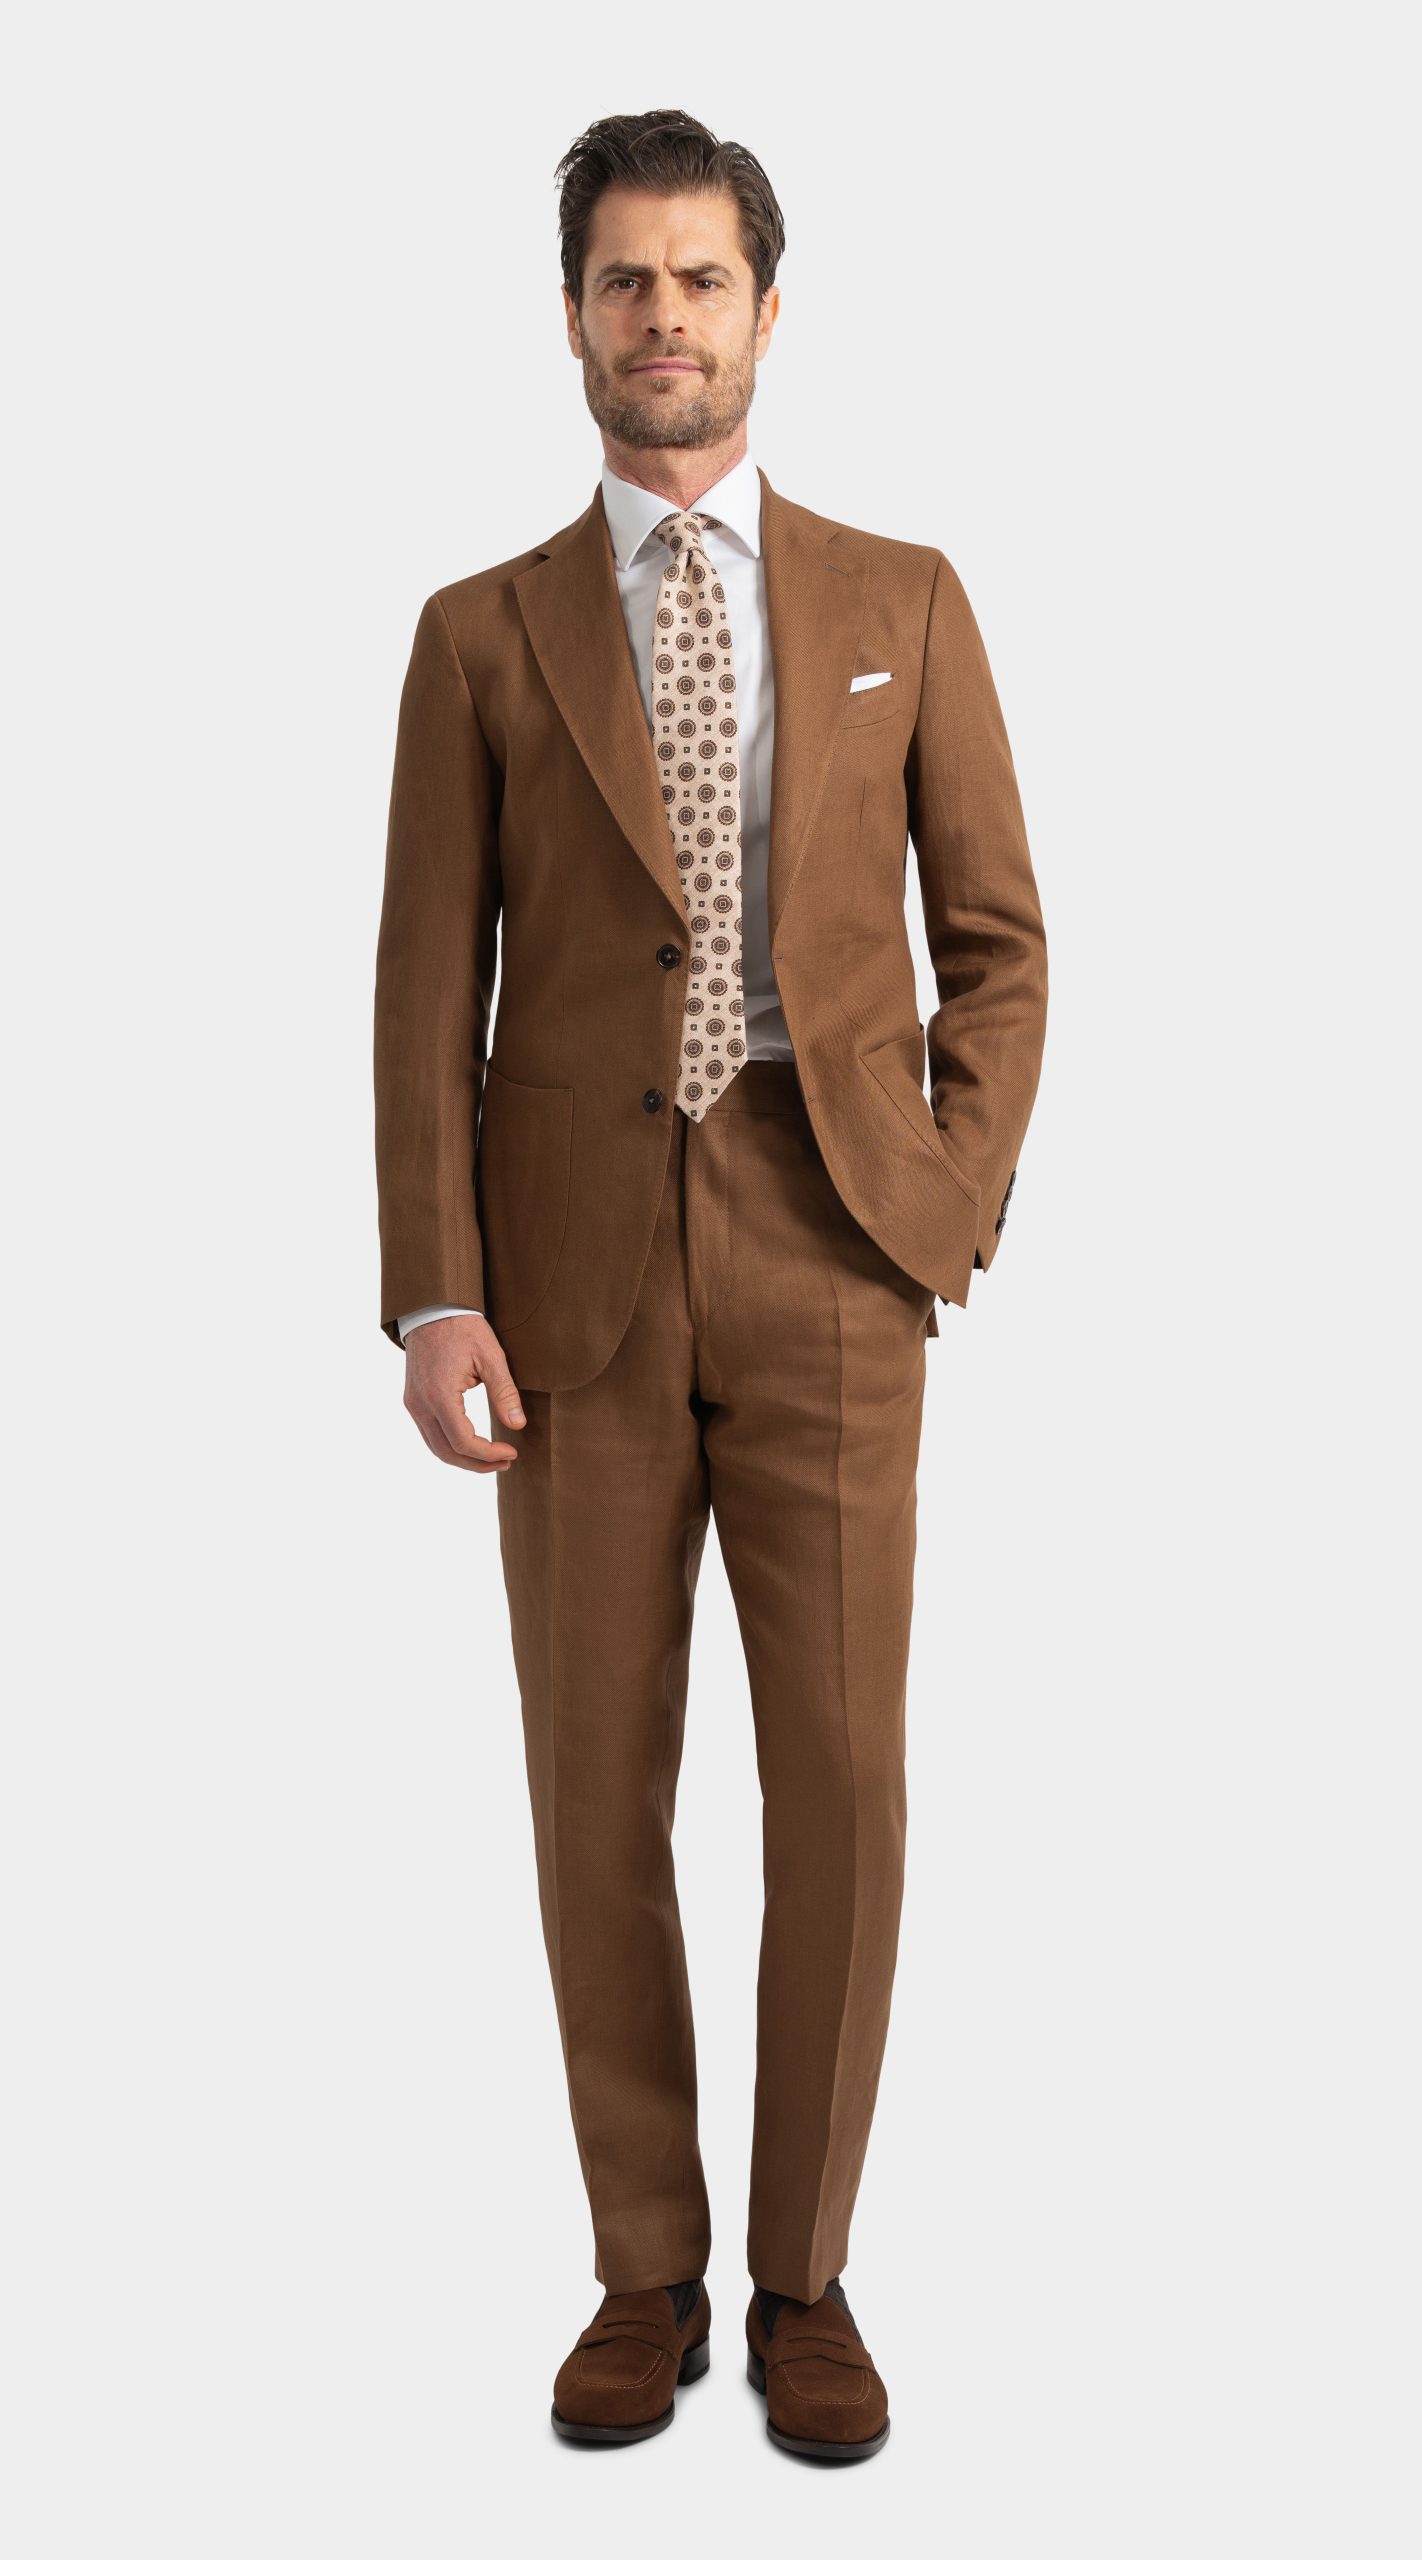 The Tan Suit - More than just a Wedding Suit - Mond